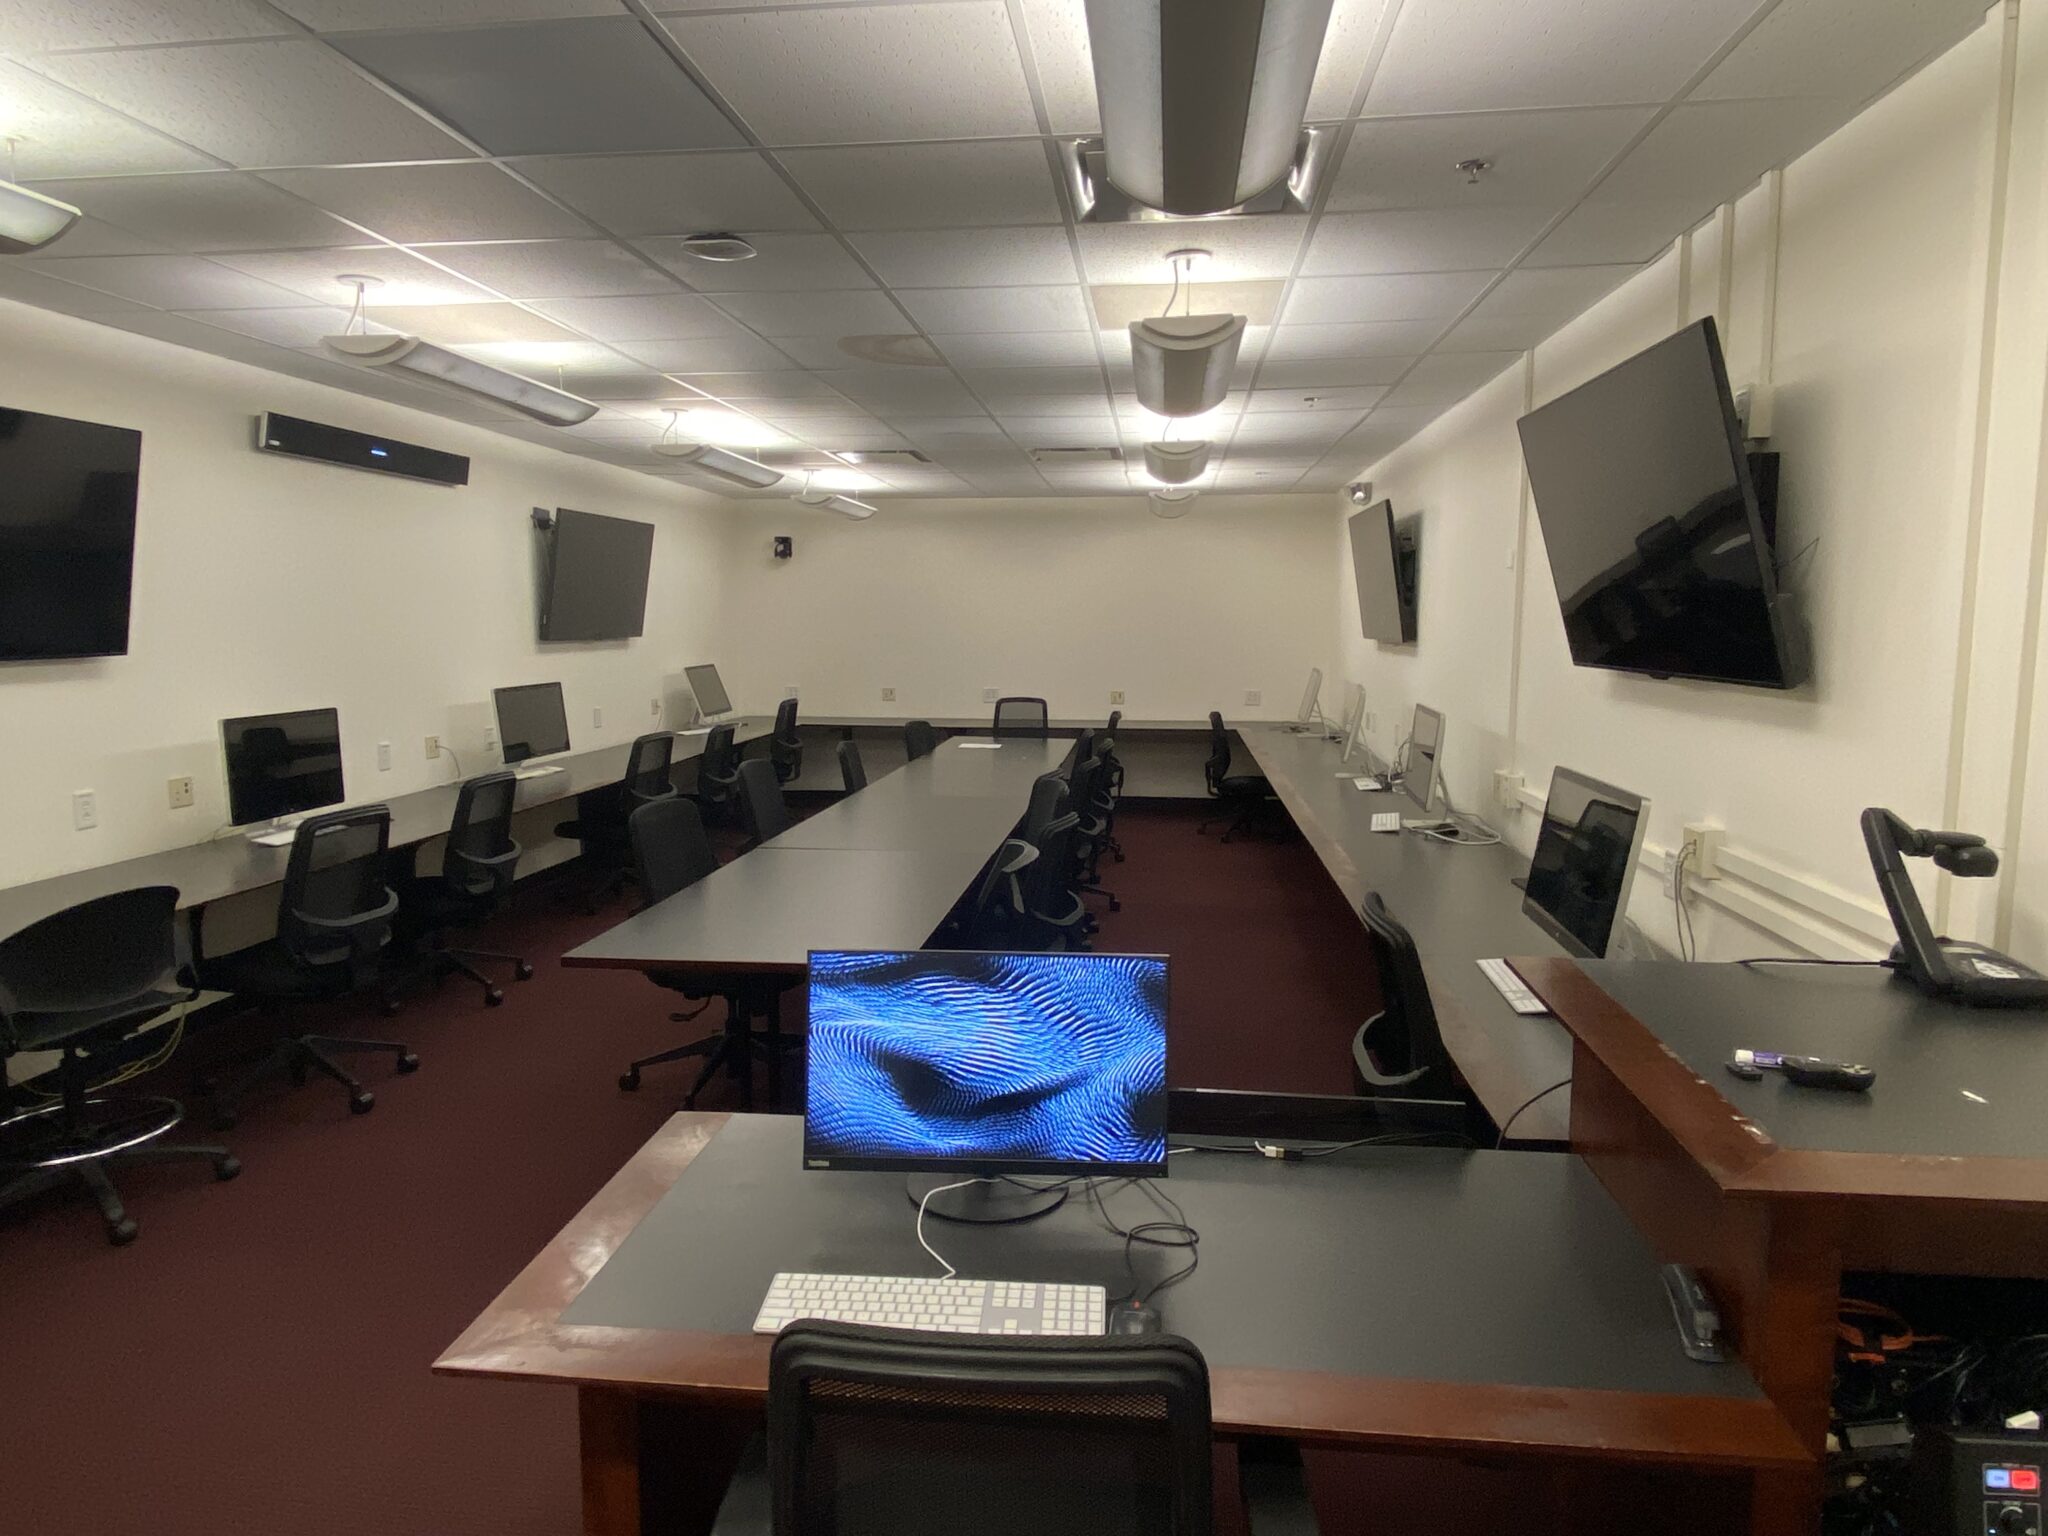 Classroom interior with desks and monitors in a ring and a conference table in the middle.